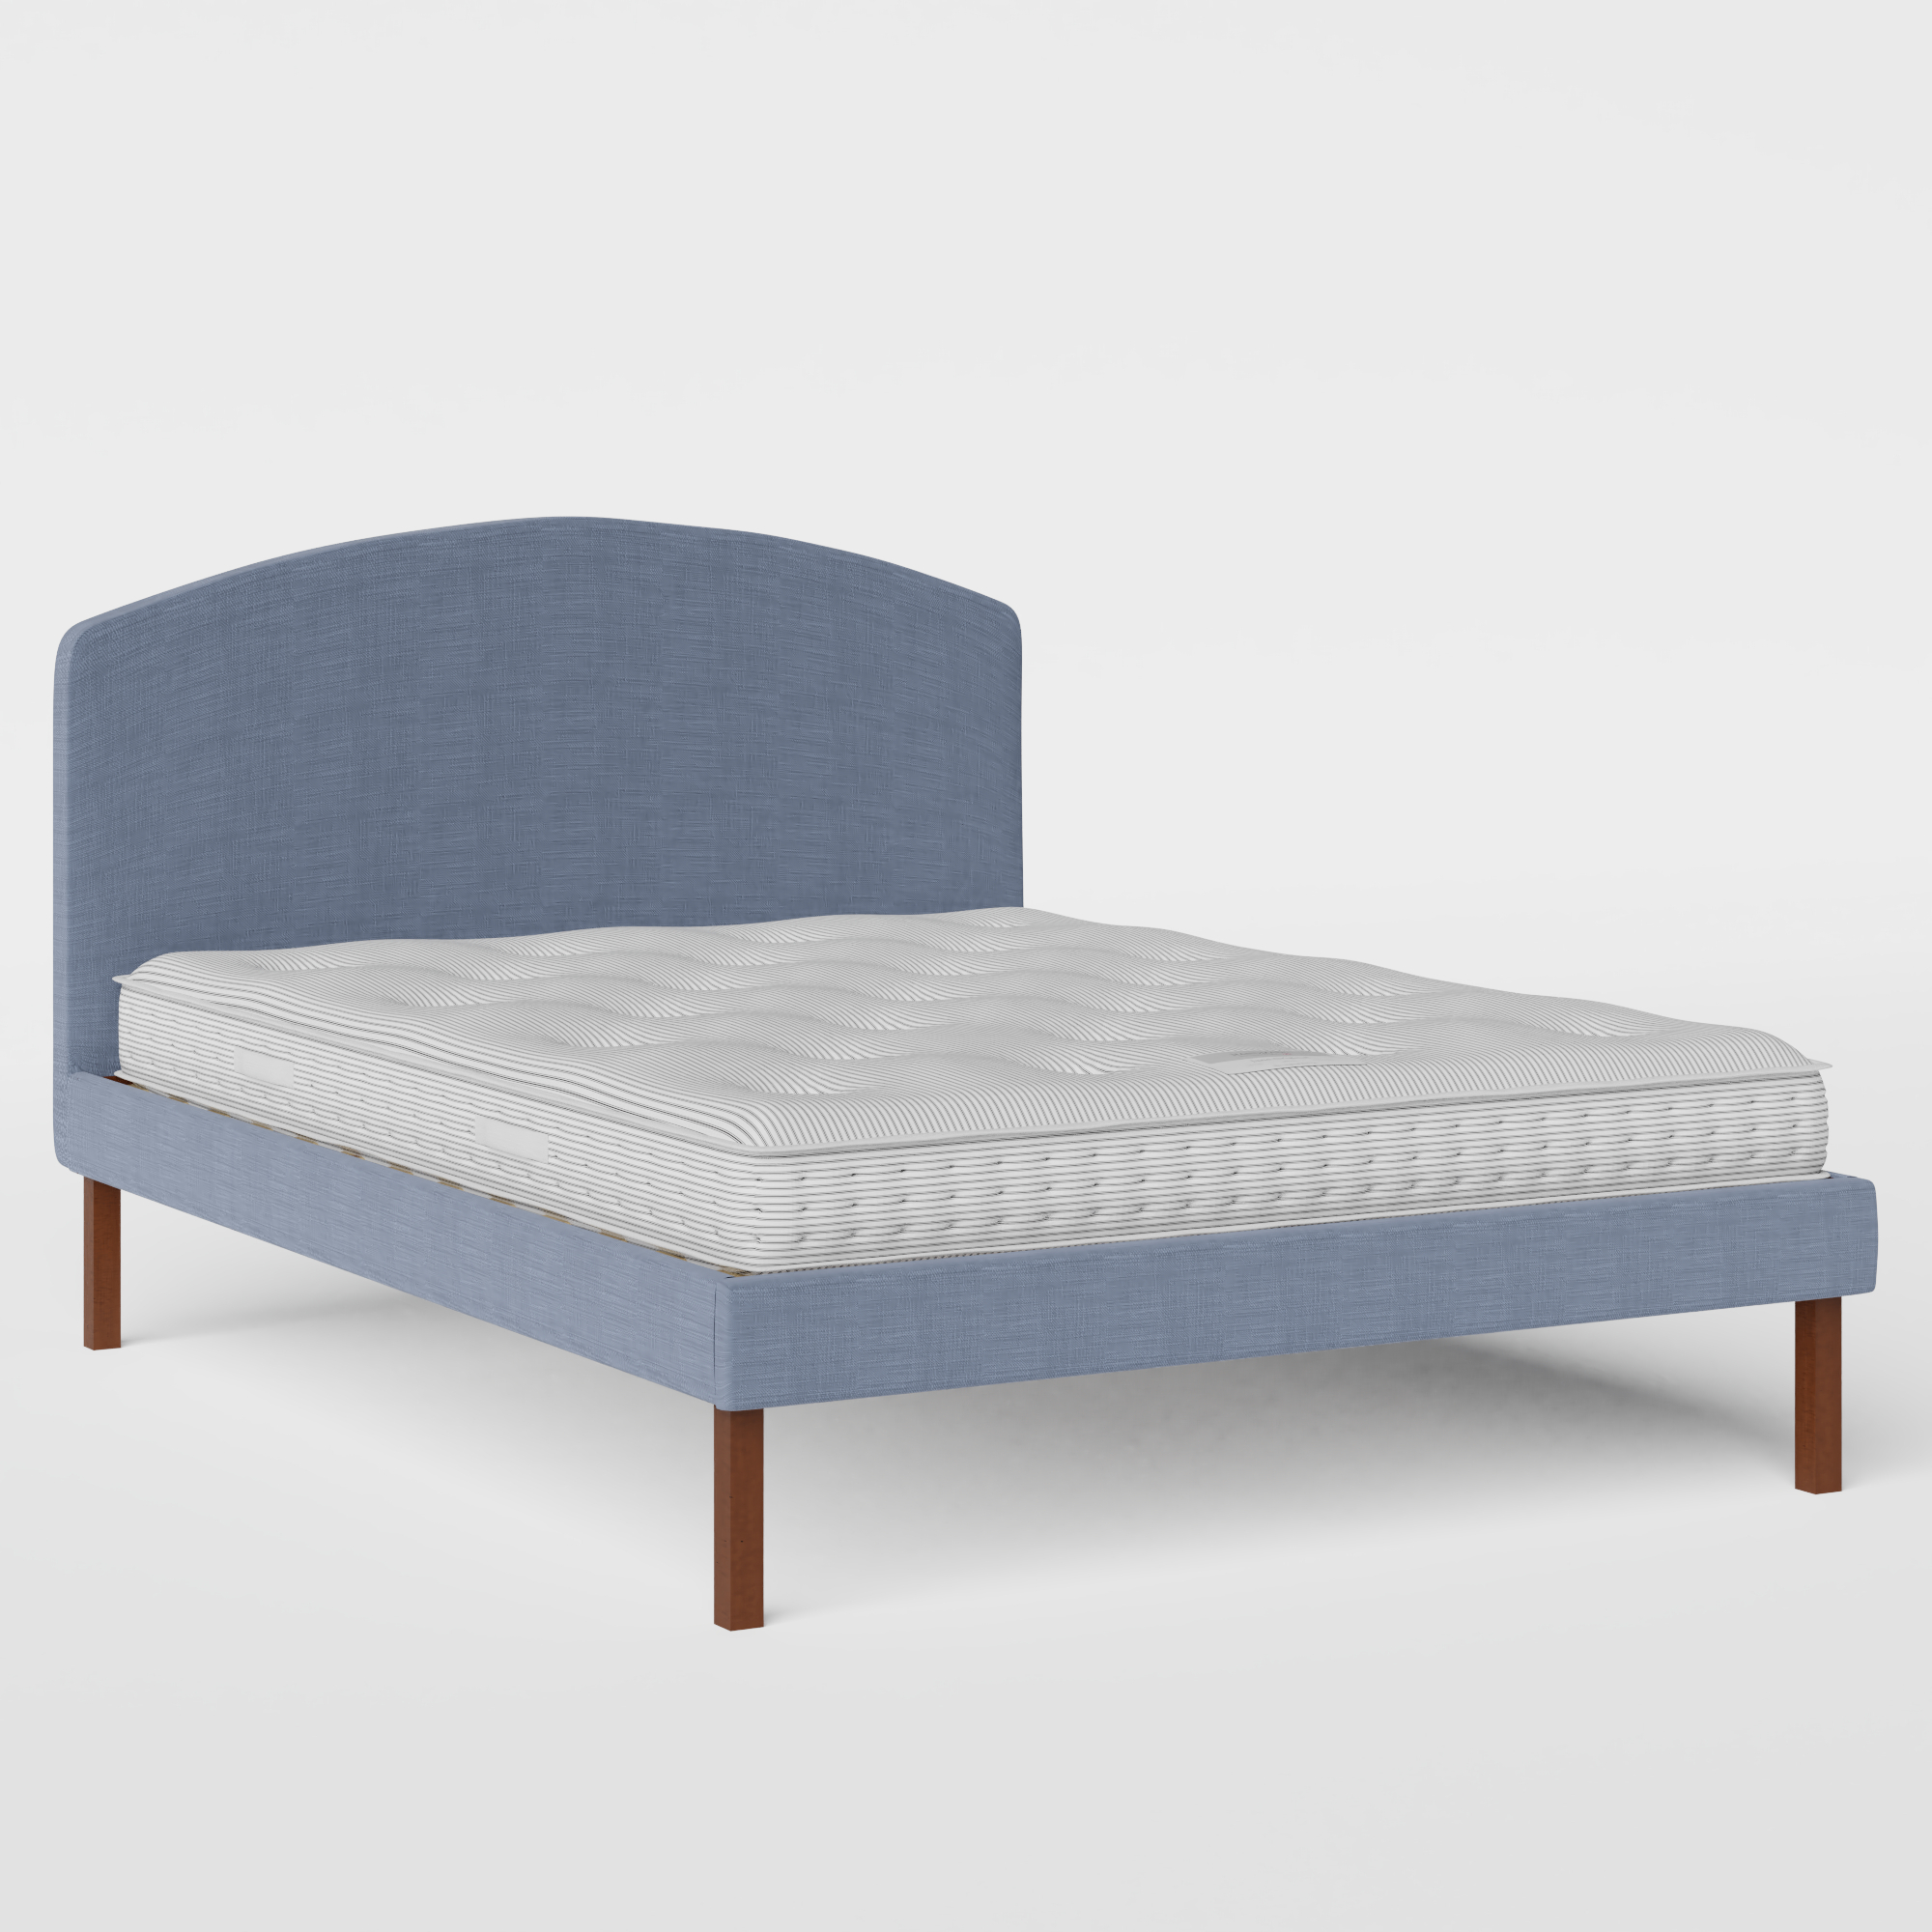 Okawa Upholstered stoffen bed in blauw